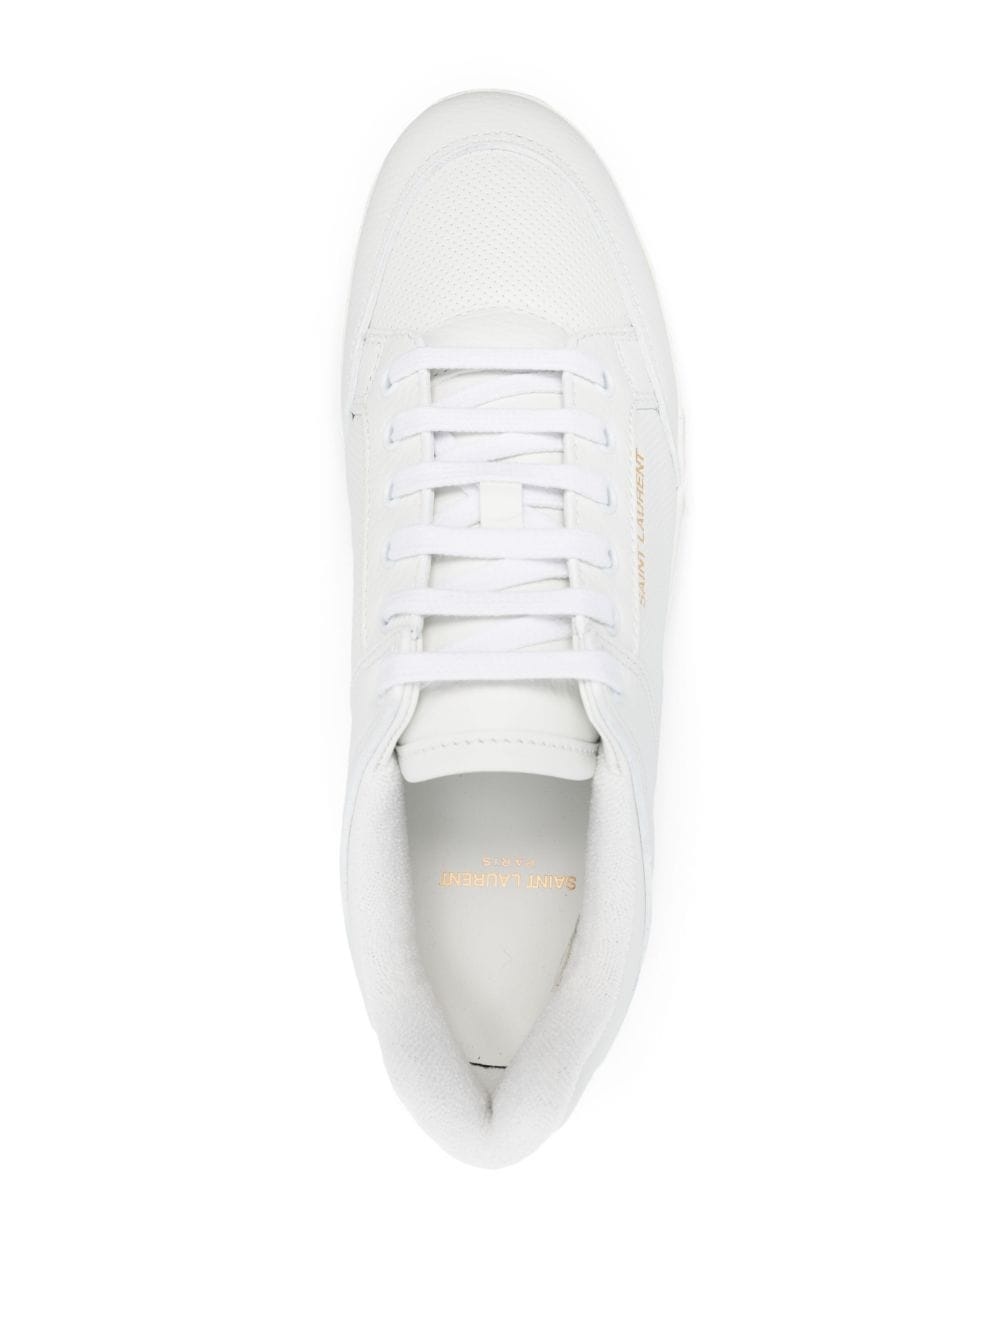 SL/61 leather perforated sneakers - 4